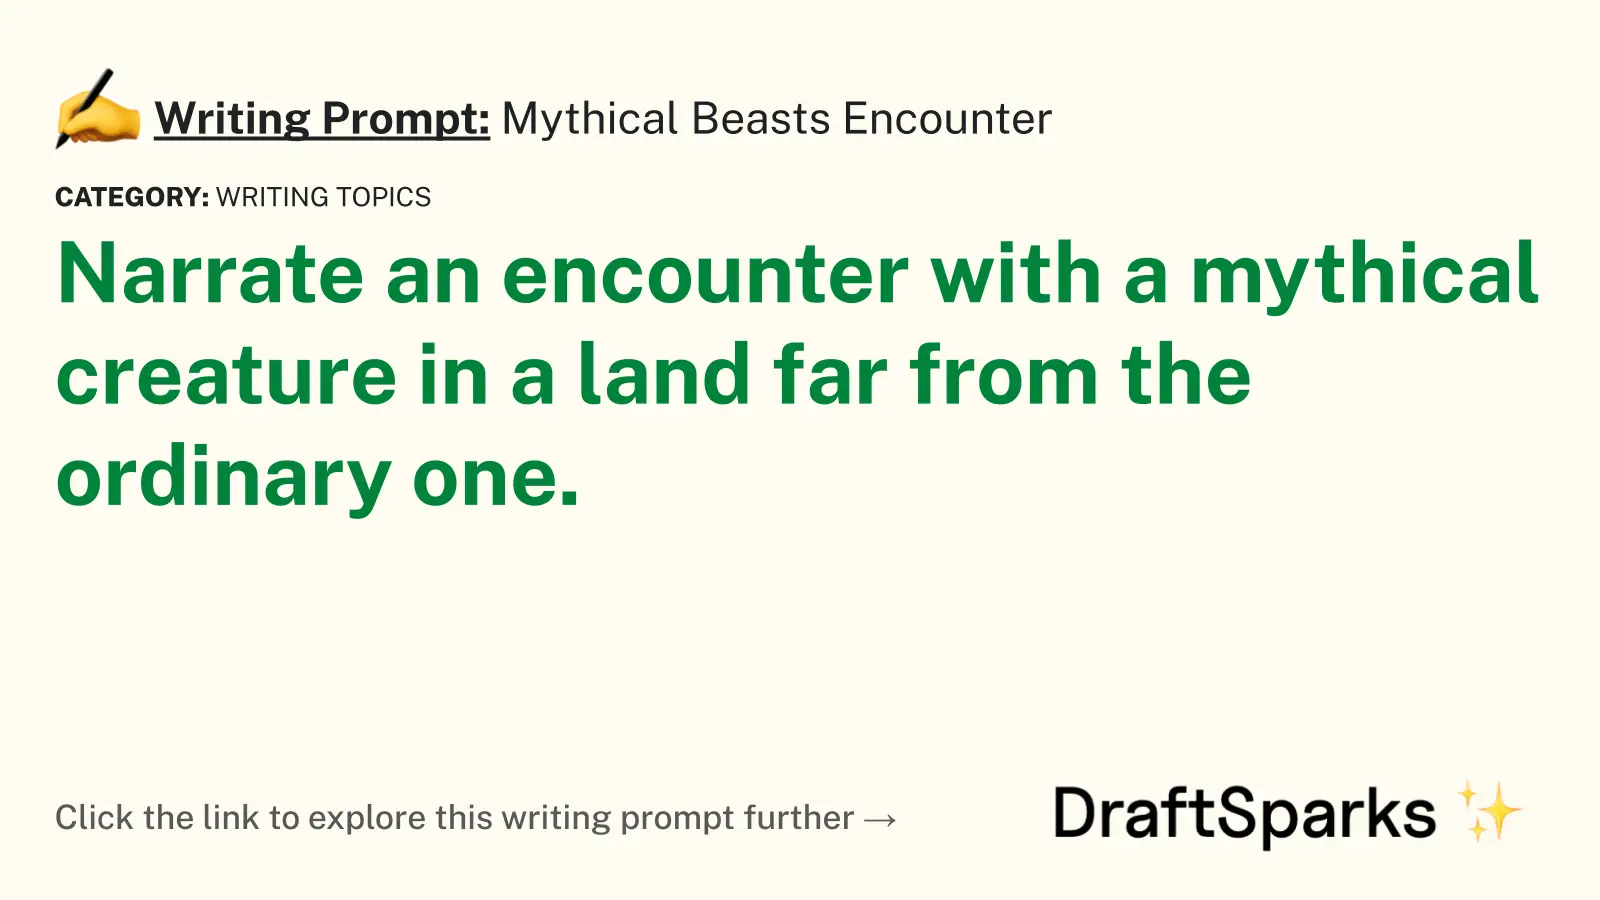 Mythical Beasts Encounter